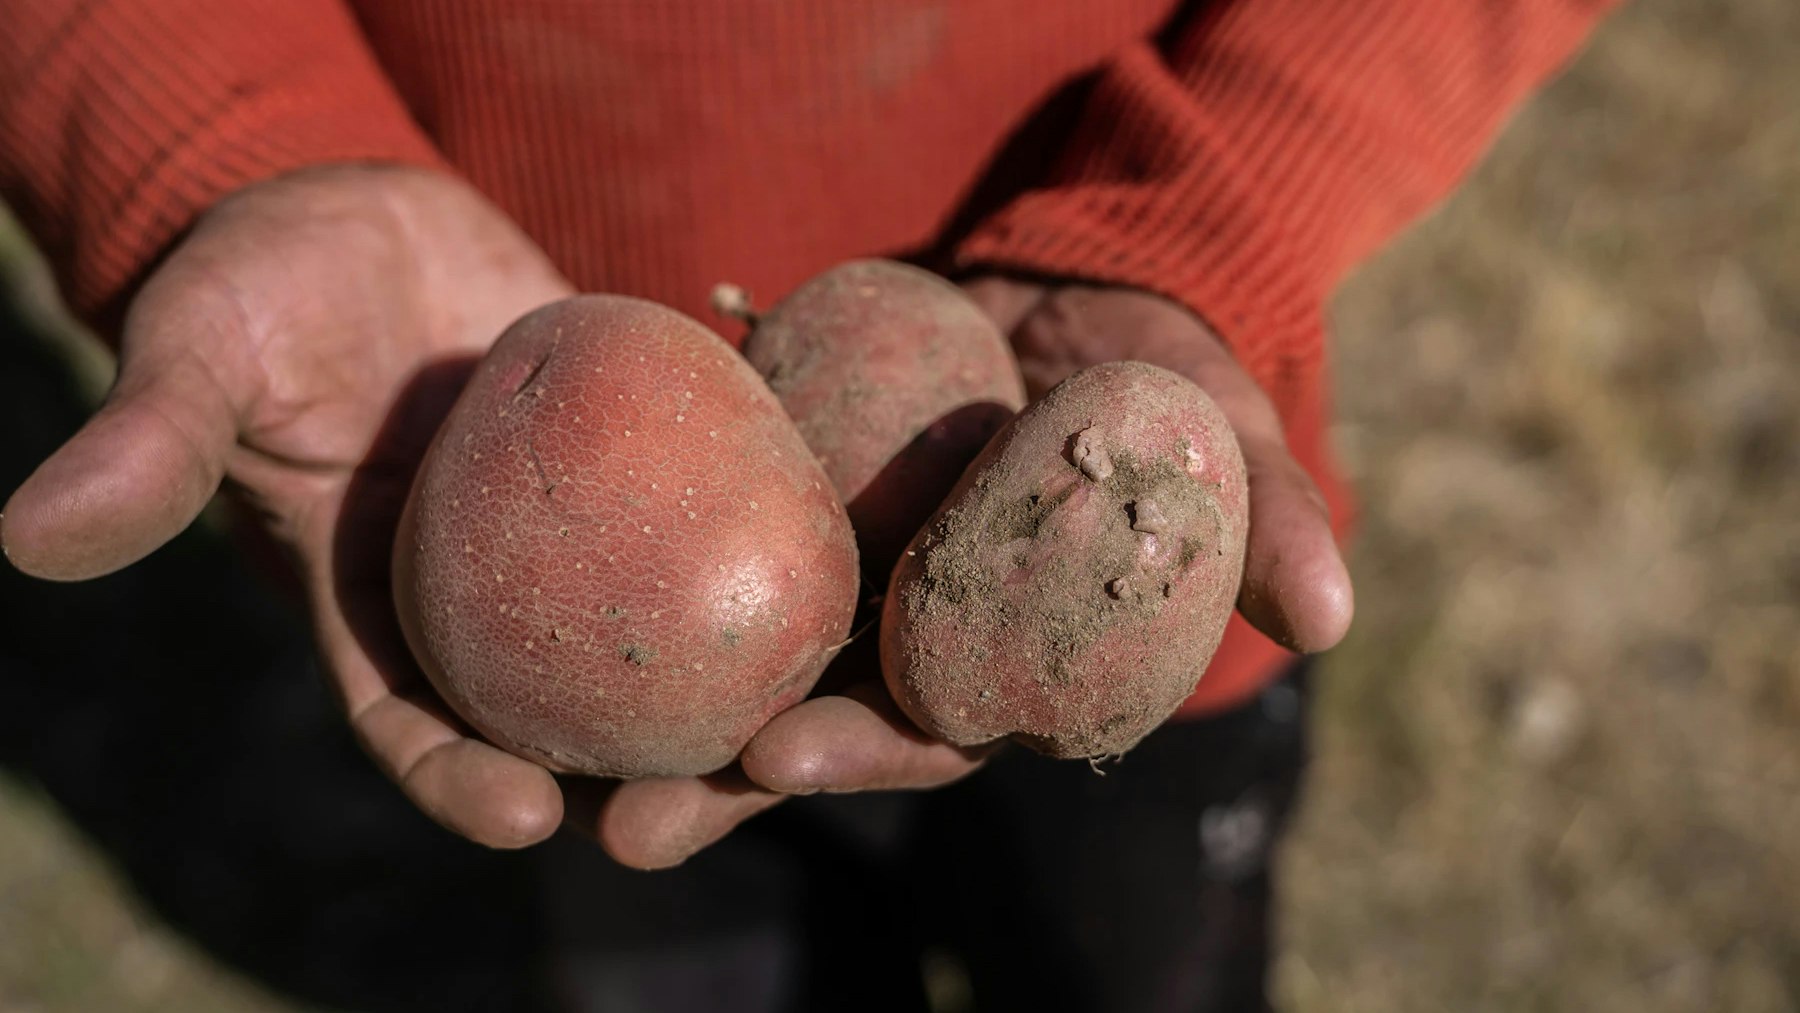 With training on seed selection, production practices and post-harvest handling and storage, potato farmers are improving their yields and their income.